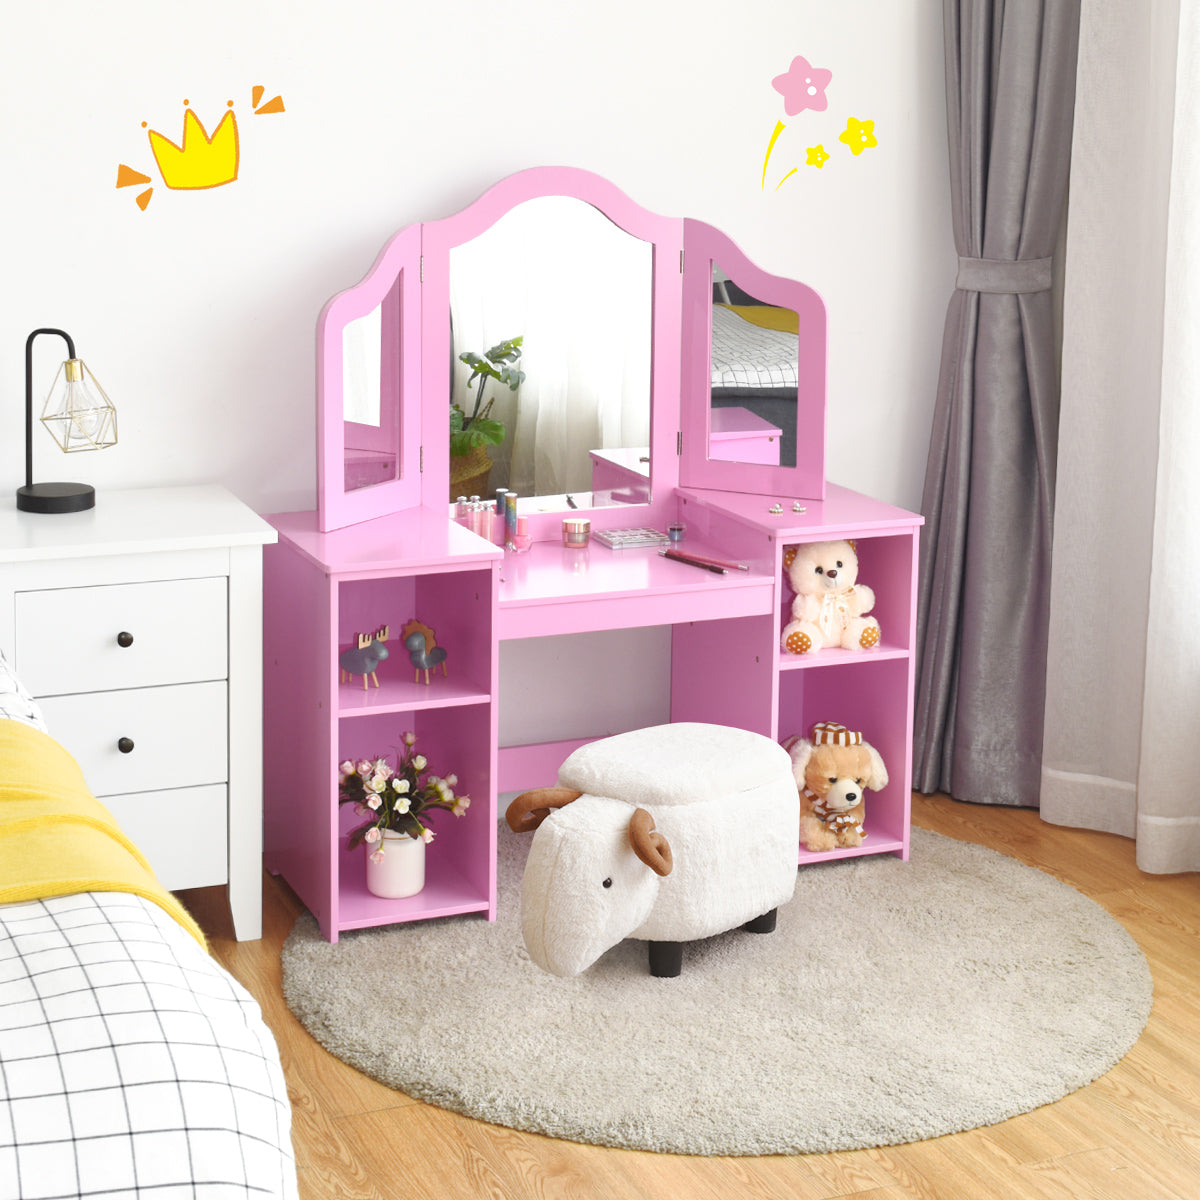 High Quality and Safe Design: This dressing table is made of high-quality MDF board, which is safe and environmentally friendly. The rounded corner of the table prevents children from colliding. Mirrors are not real glass but plastic. Prevent children from being hurt by accidental breakage of the mirror. ASTM F963 and CPSIA certification ensure the quality and safety of vanity set.